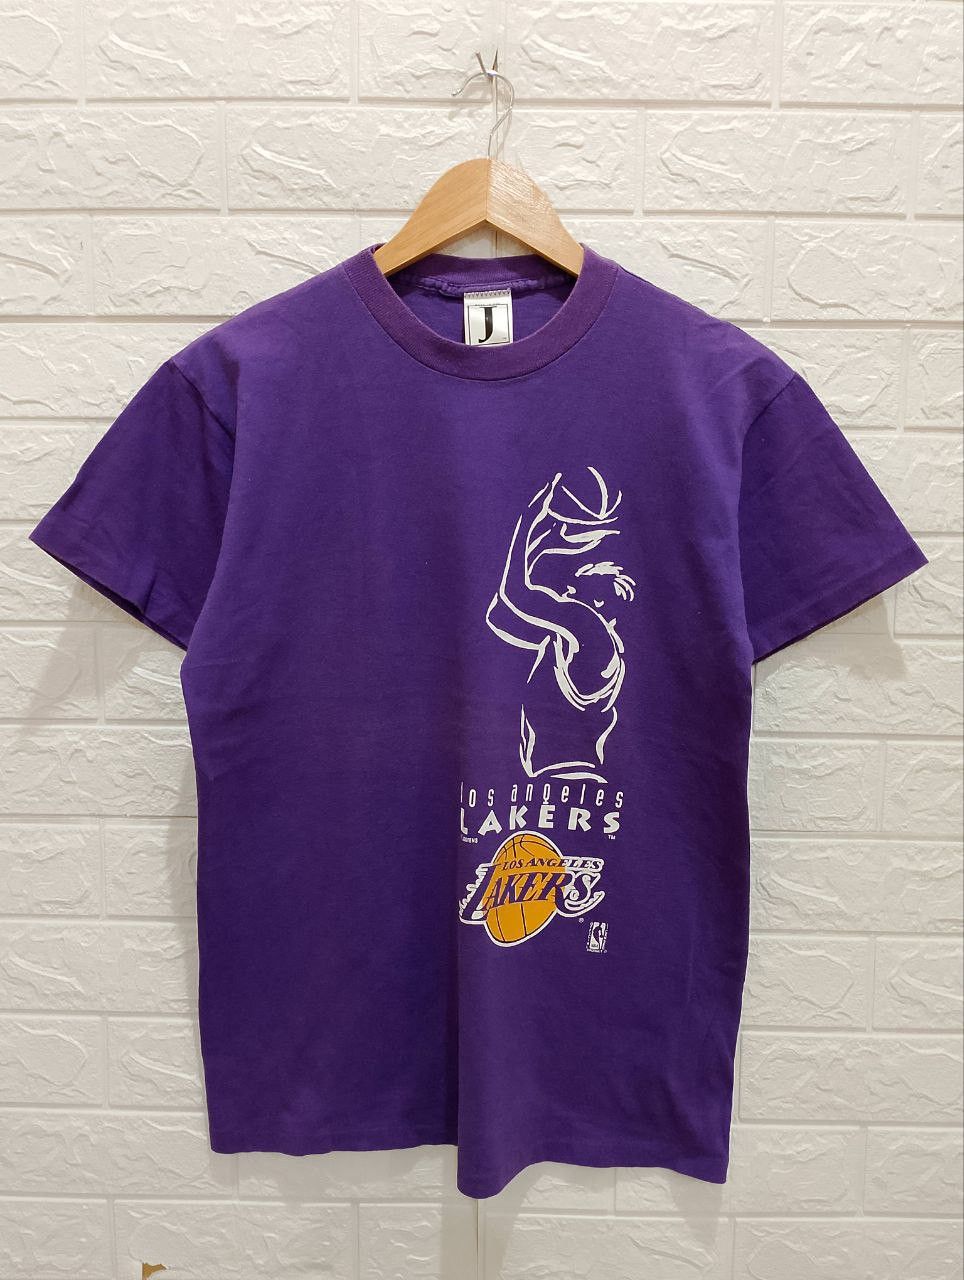 Vintage 90s Los Angeles Lakers by Jostens Made in USA Tees - 2